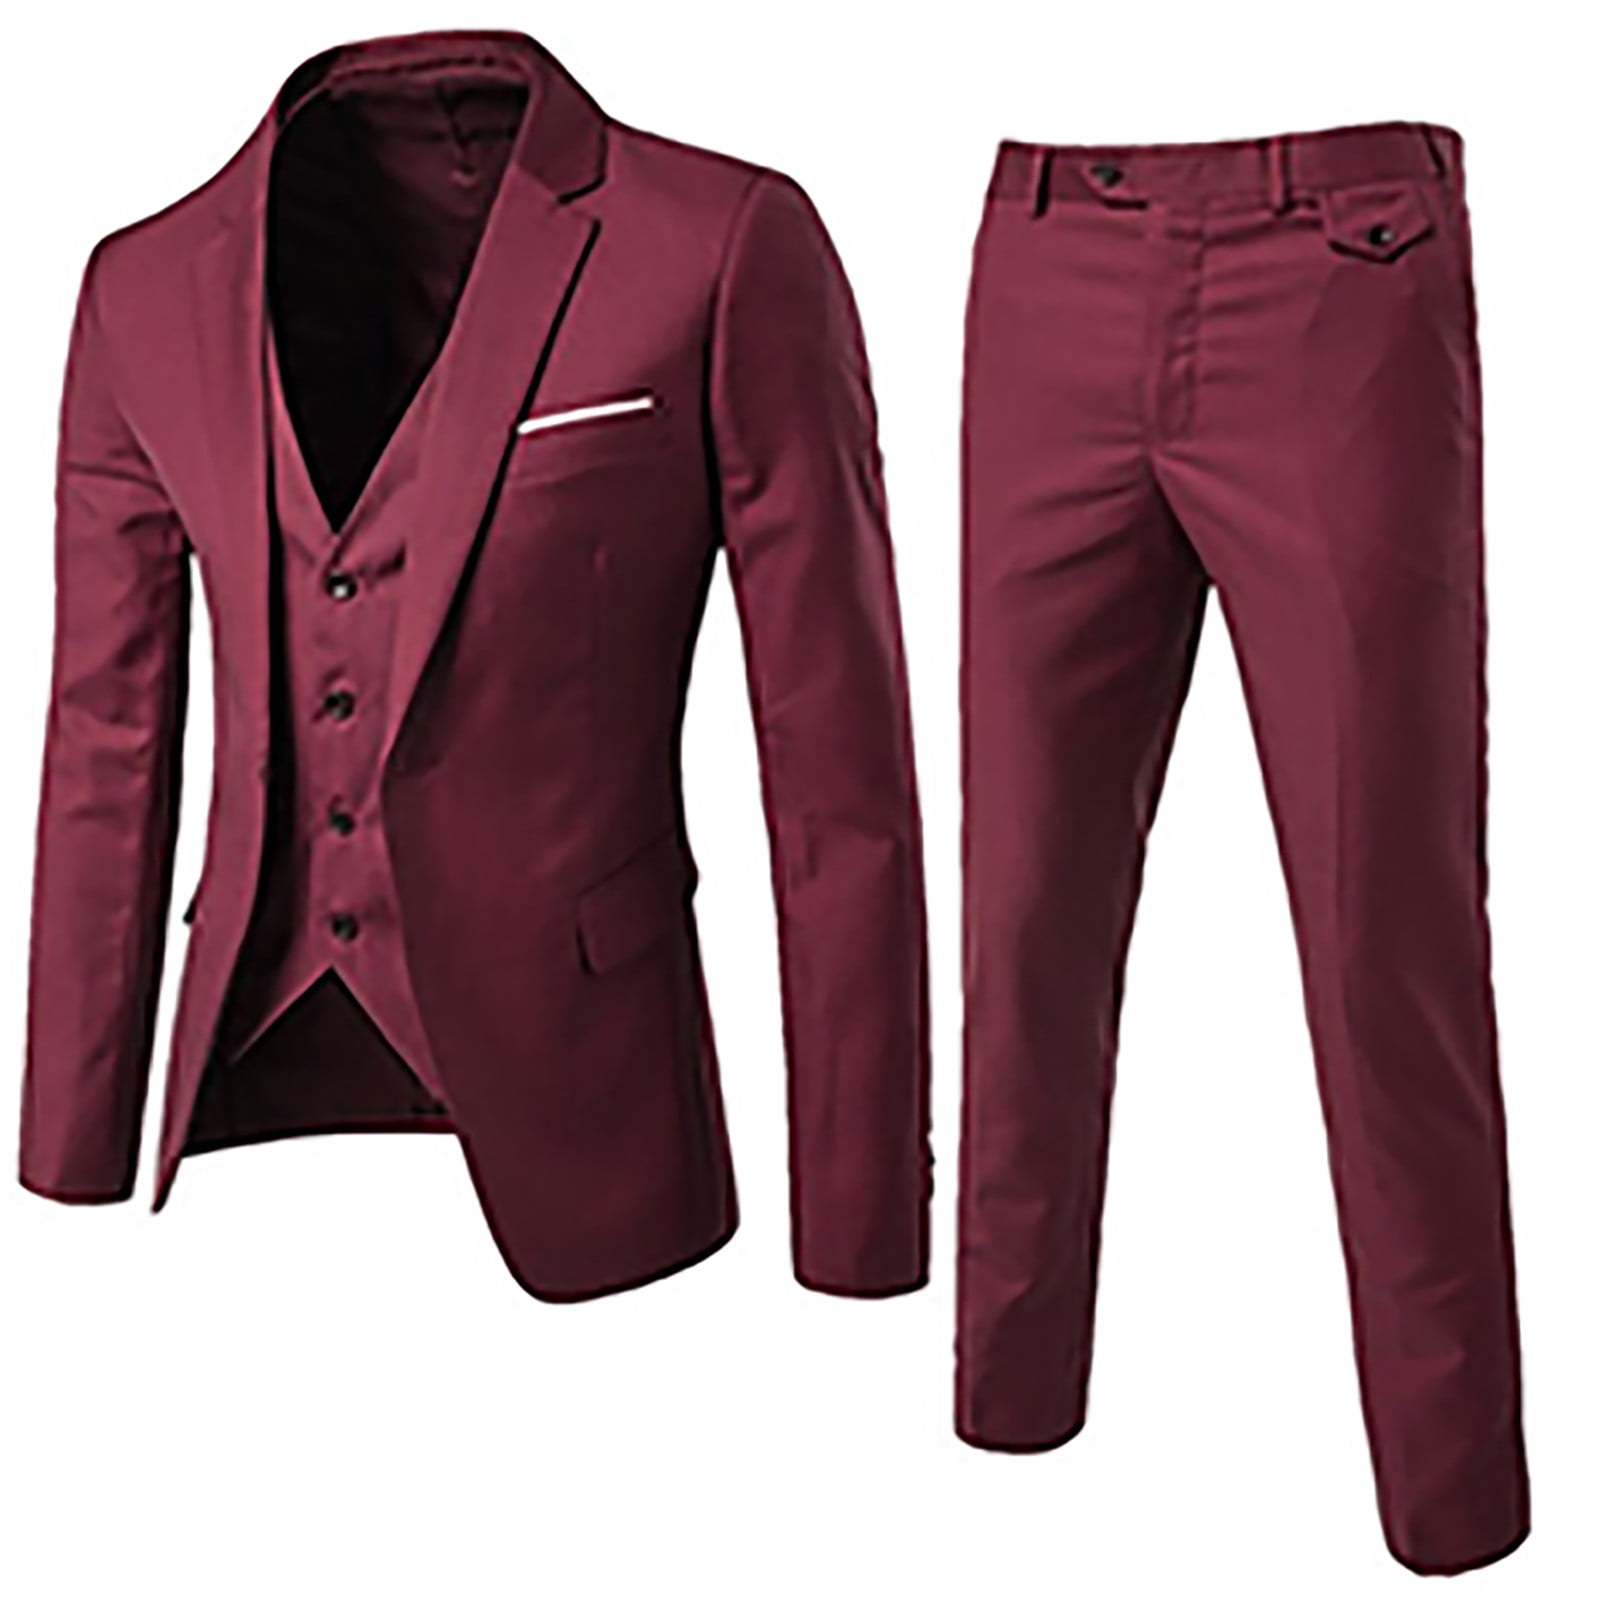 Classic Italian jacket and coat buttons in 7 colors